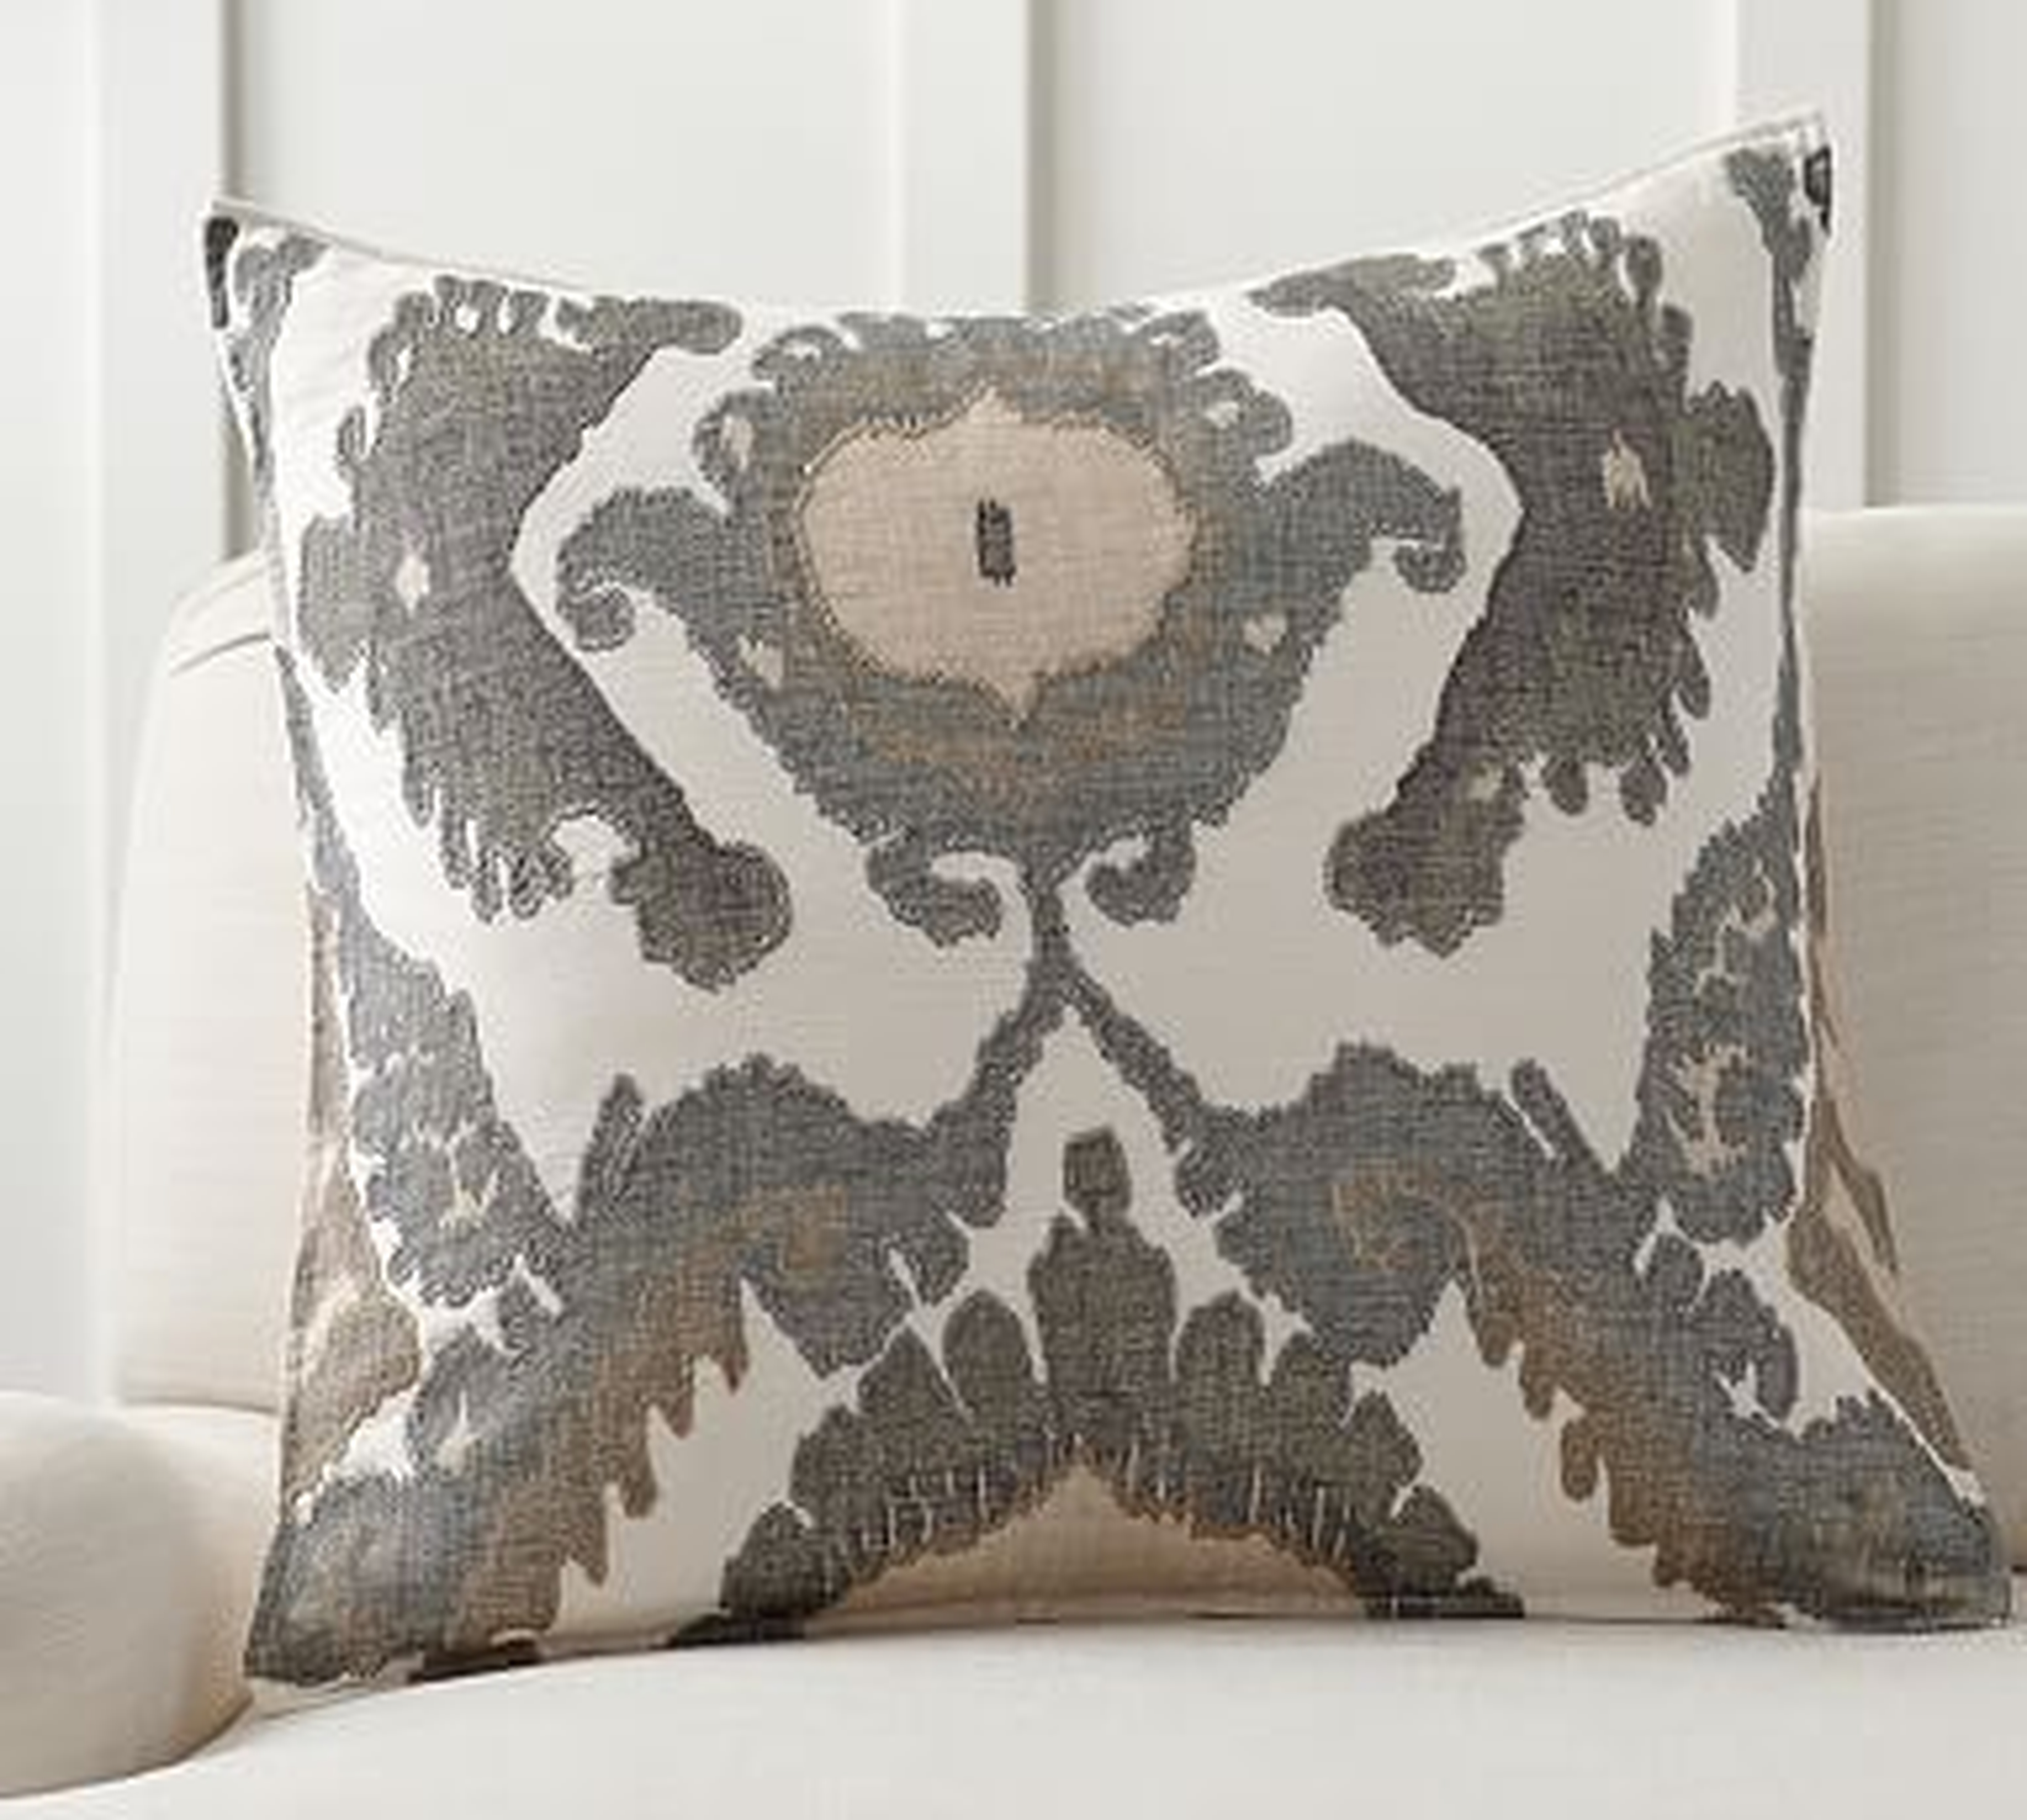 Hudson Ikat Embroidered Pillow Cover, 24", Neutral - Pottery Barn